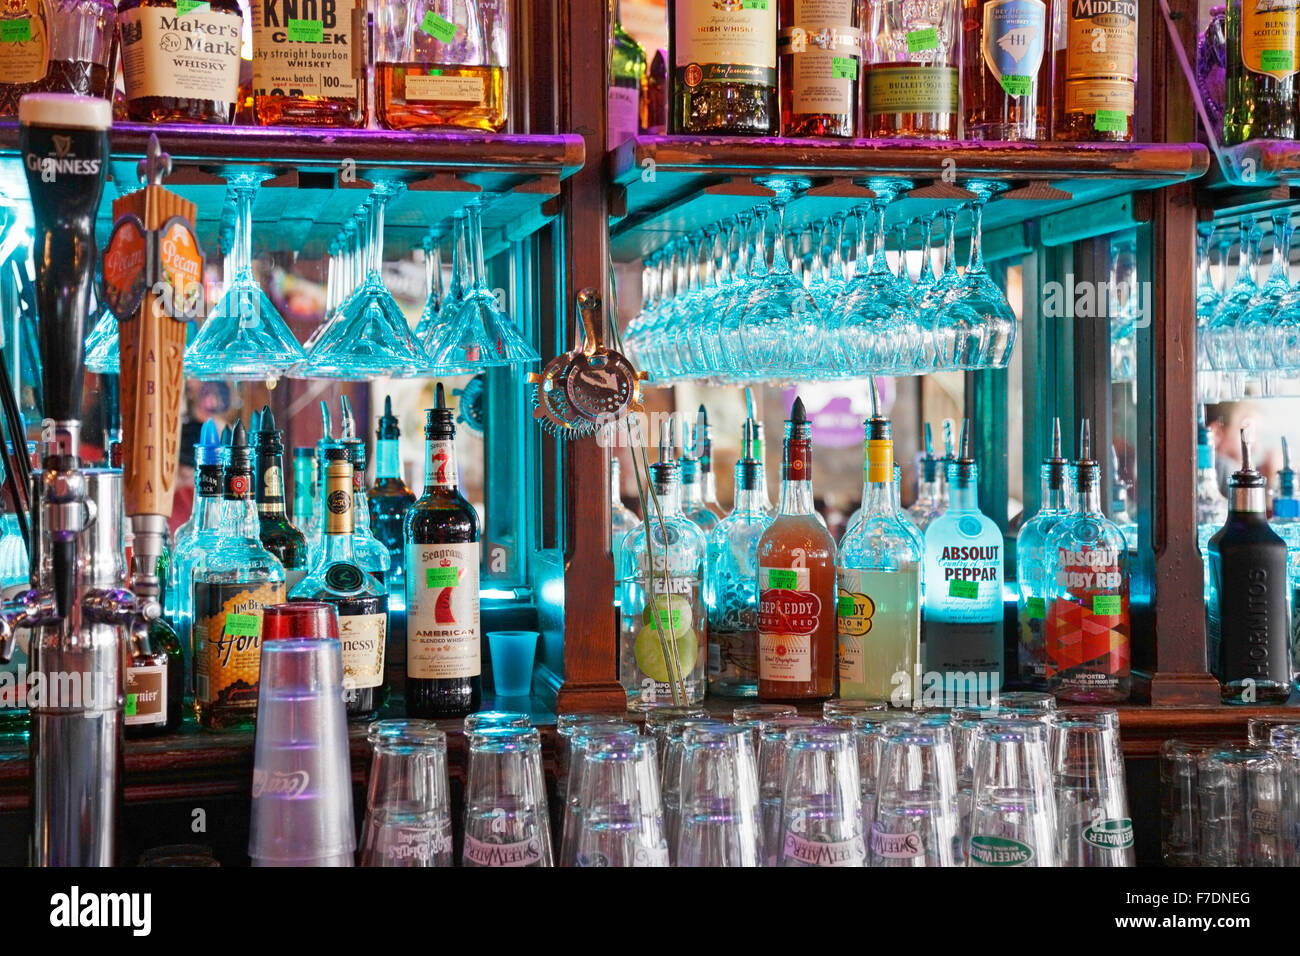 Alcohol and liquor bottles lined up in a bar and pub Stock Photo